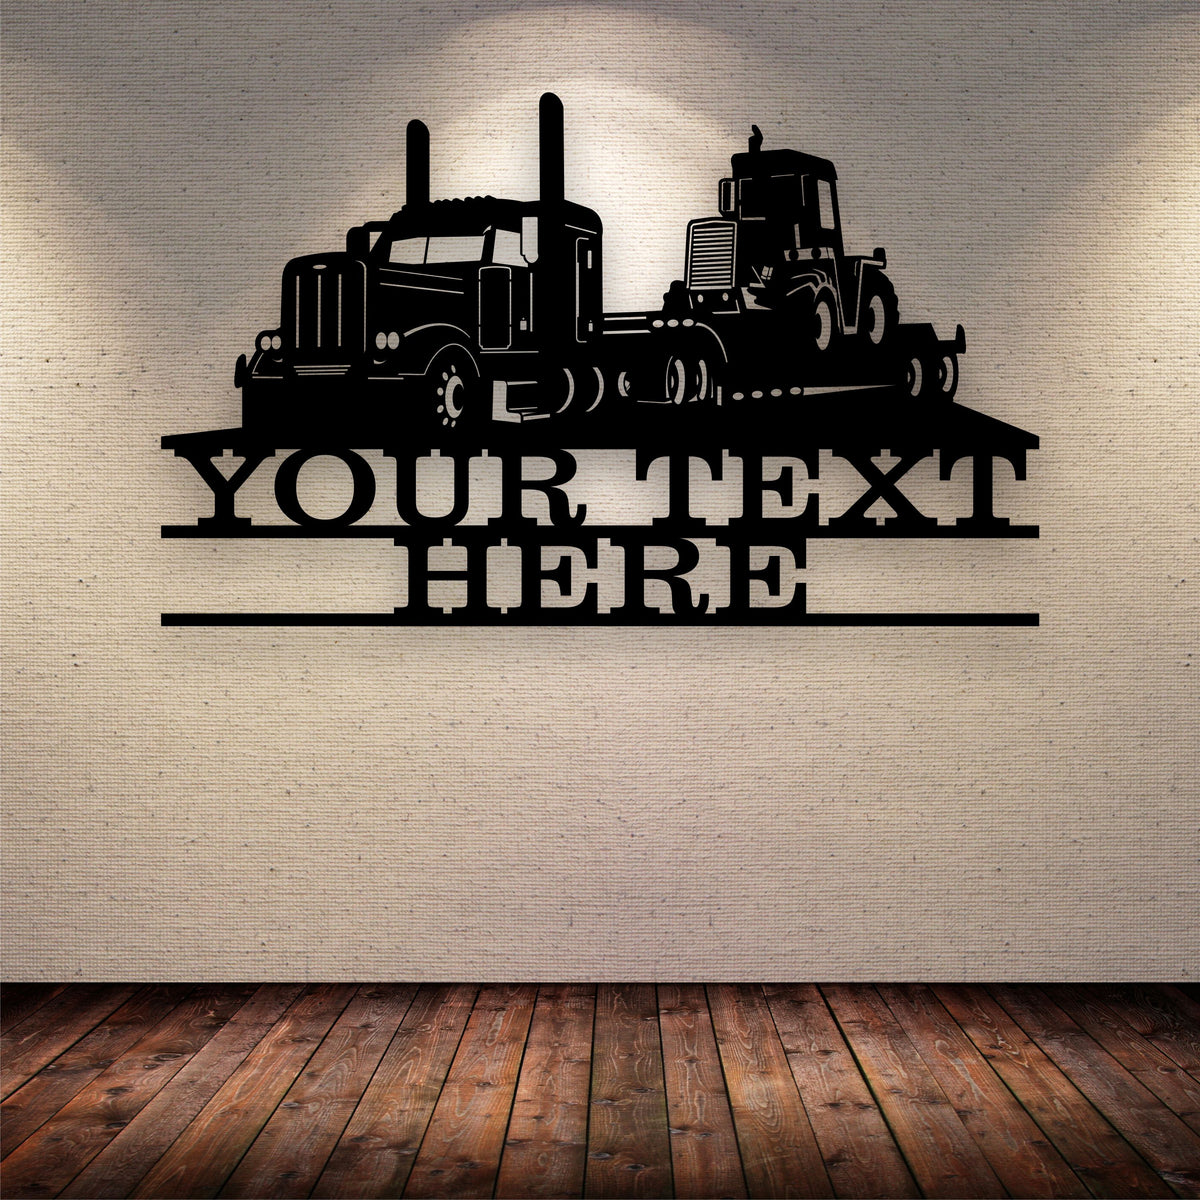 Lowboy Pete Your Text Here Metal Wall Art Free Shipping